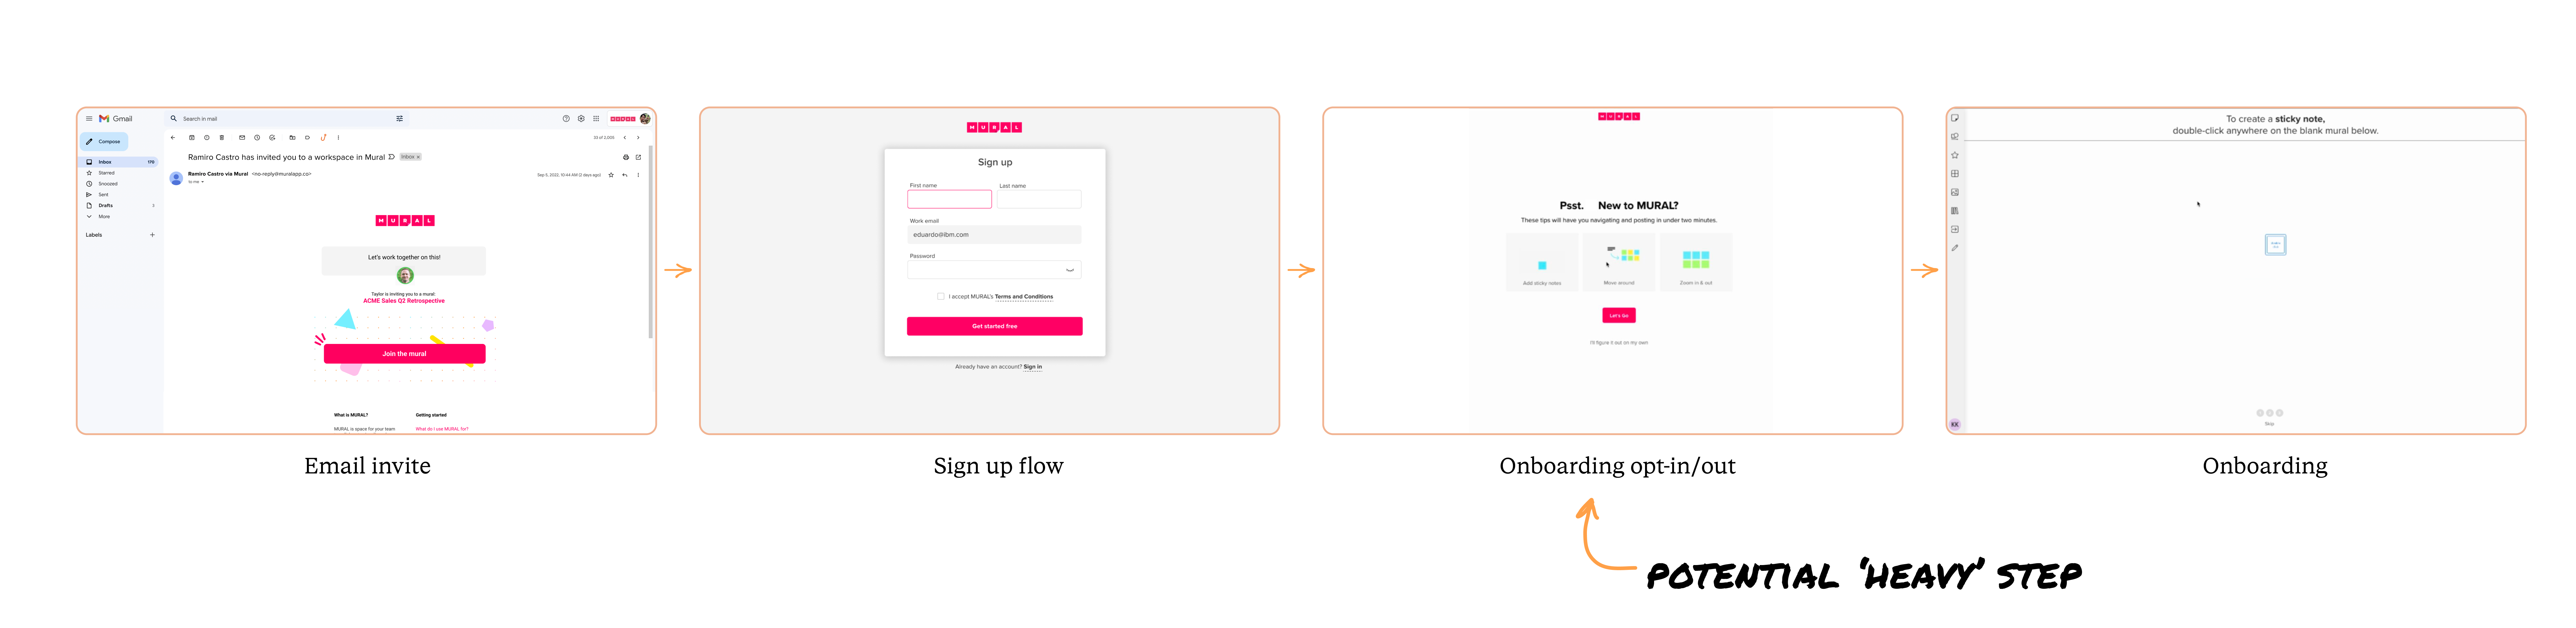 Old onboarding opt in